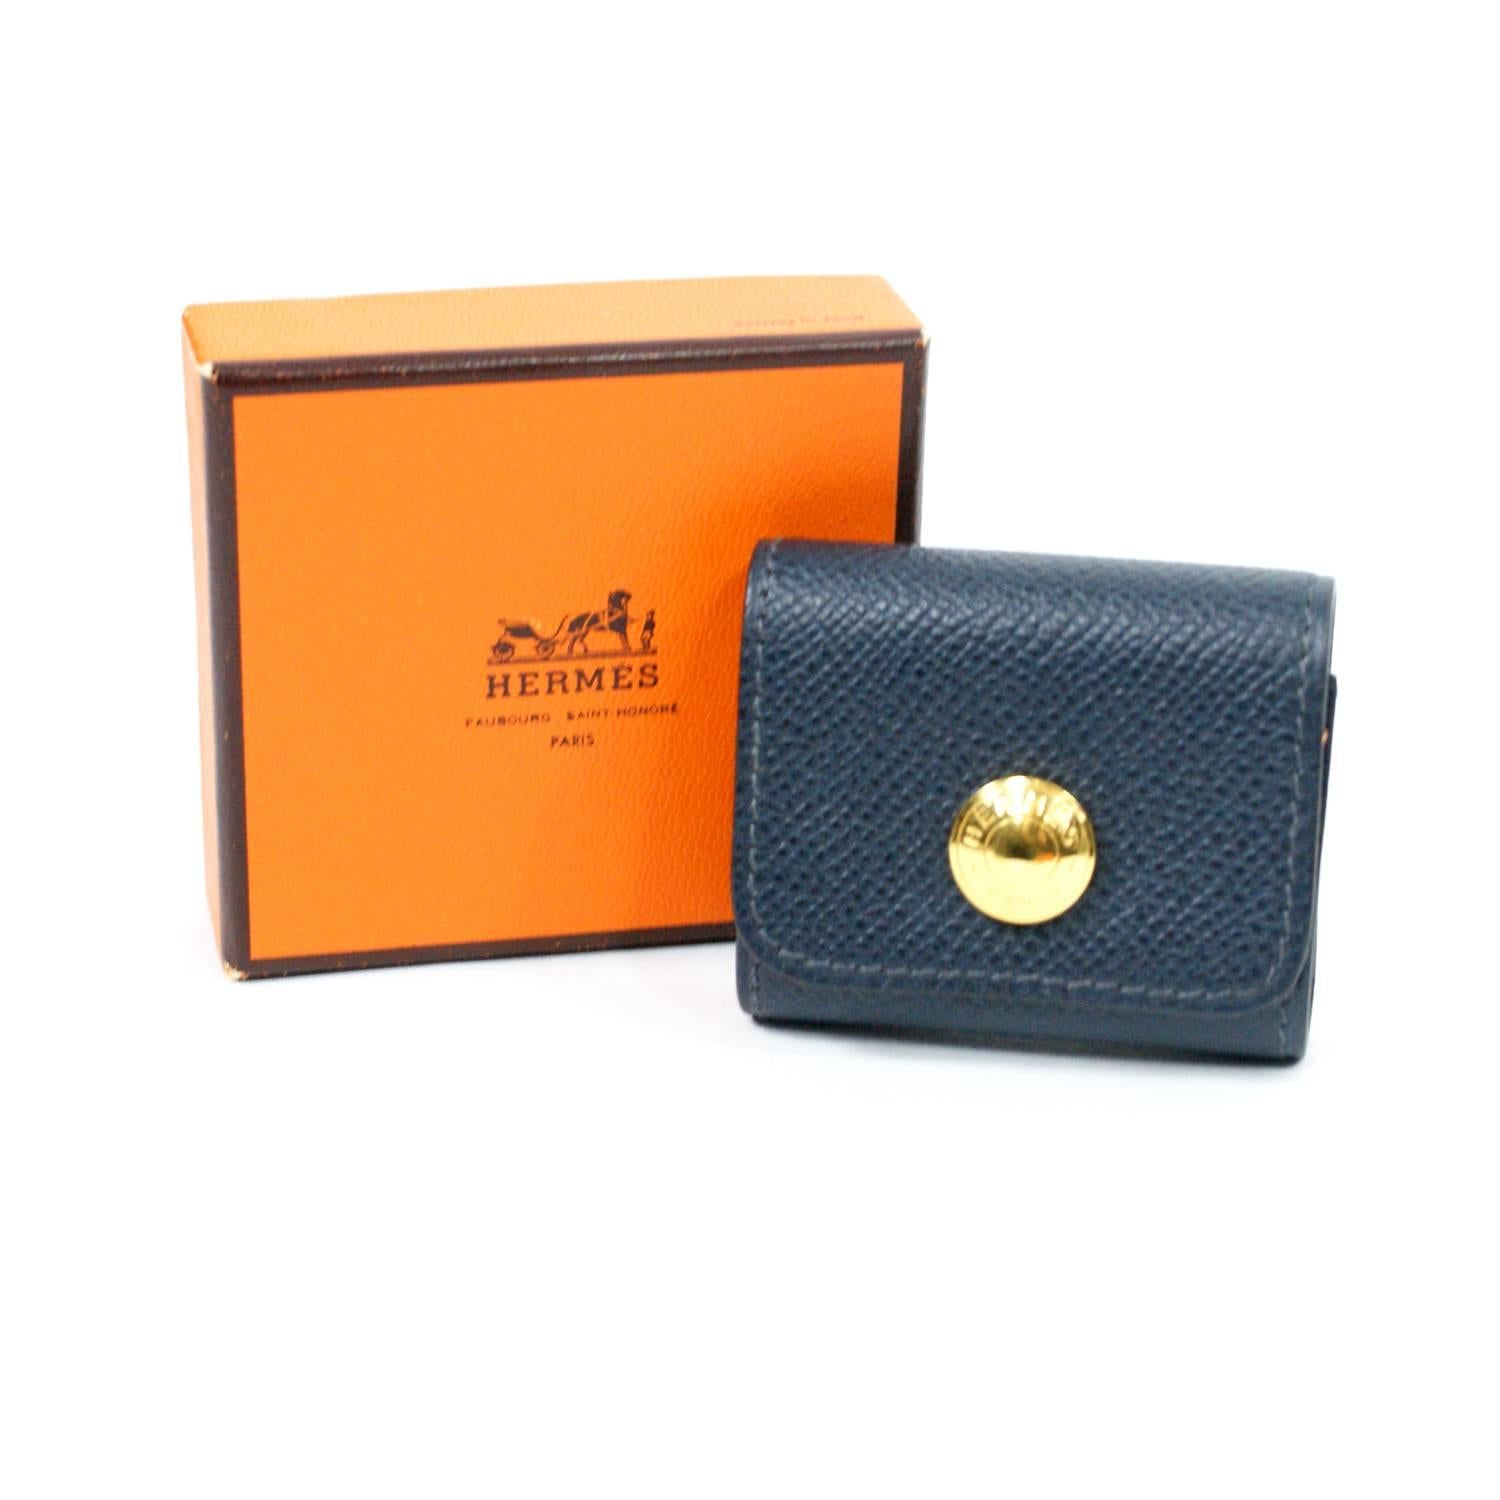 Navy blue
Crafted in leather
Gold tone hardware
Snap closure 

